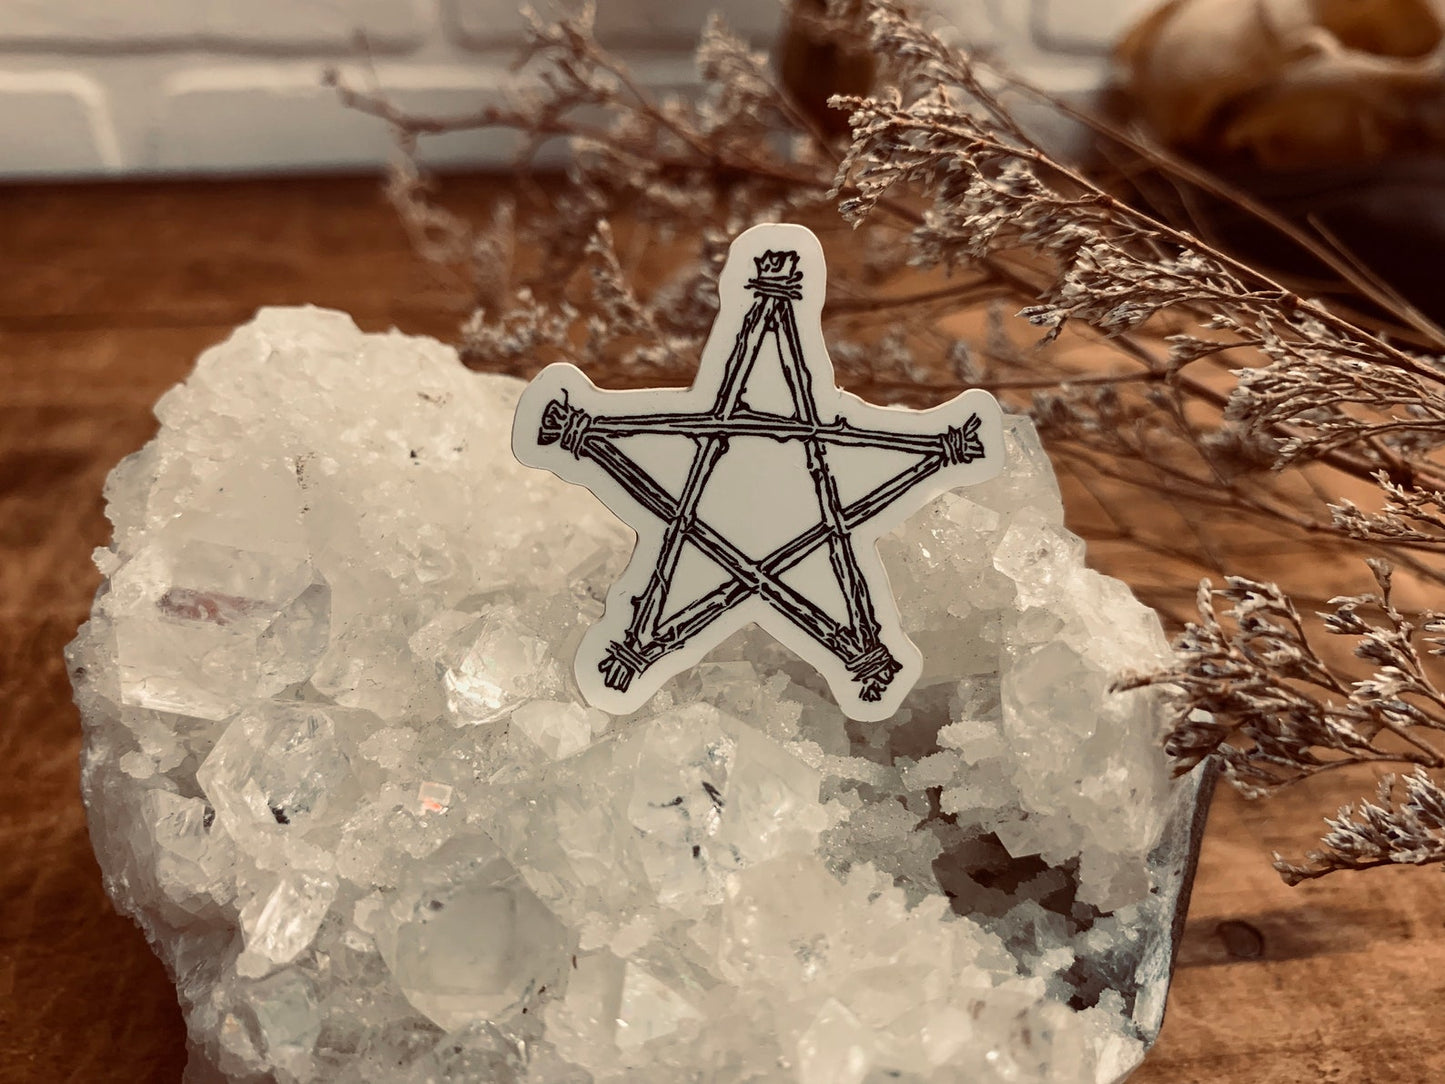 Add some witchy vibes to your everyday with these small pentacle stickers. These stickers are perfect for your Grimoire, journal, notebook, or anywhere you want to add a little bit of magic!